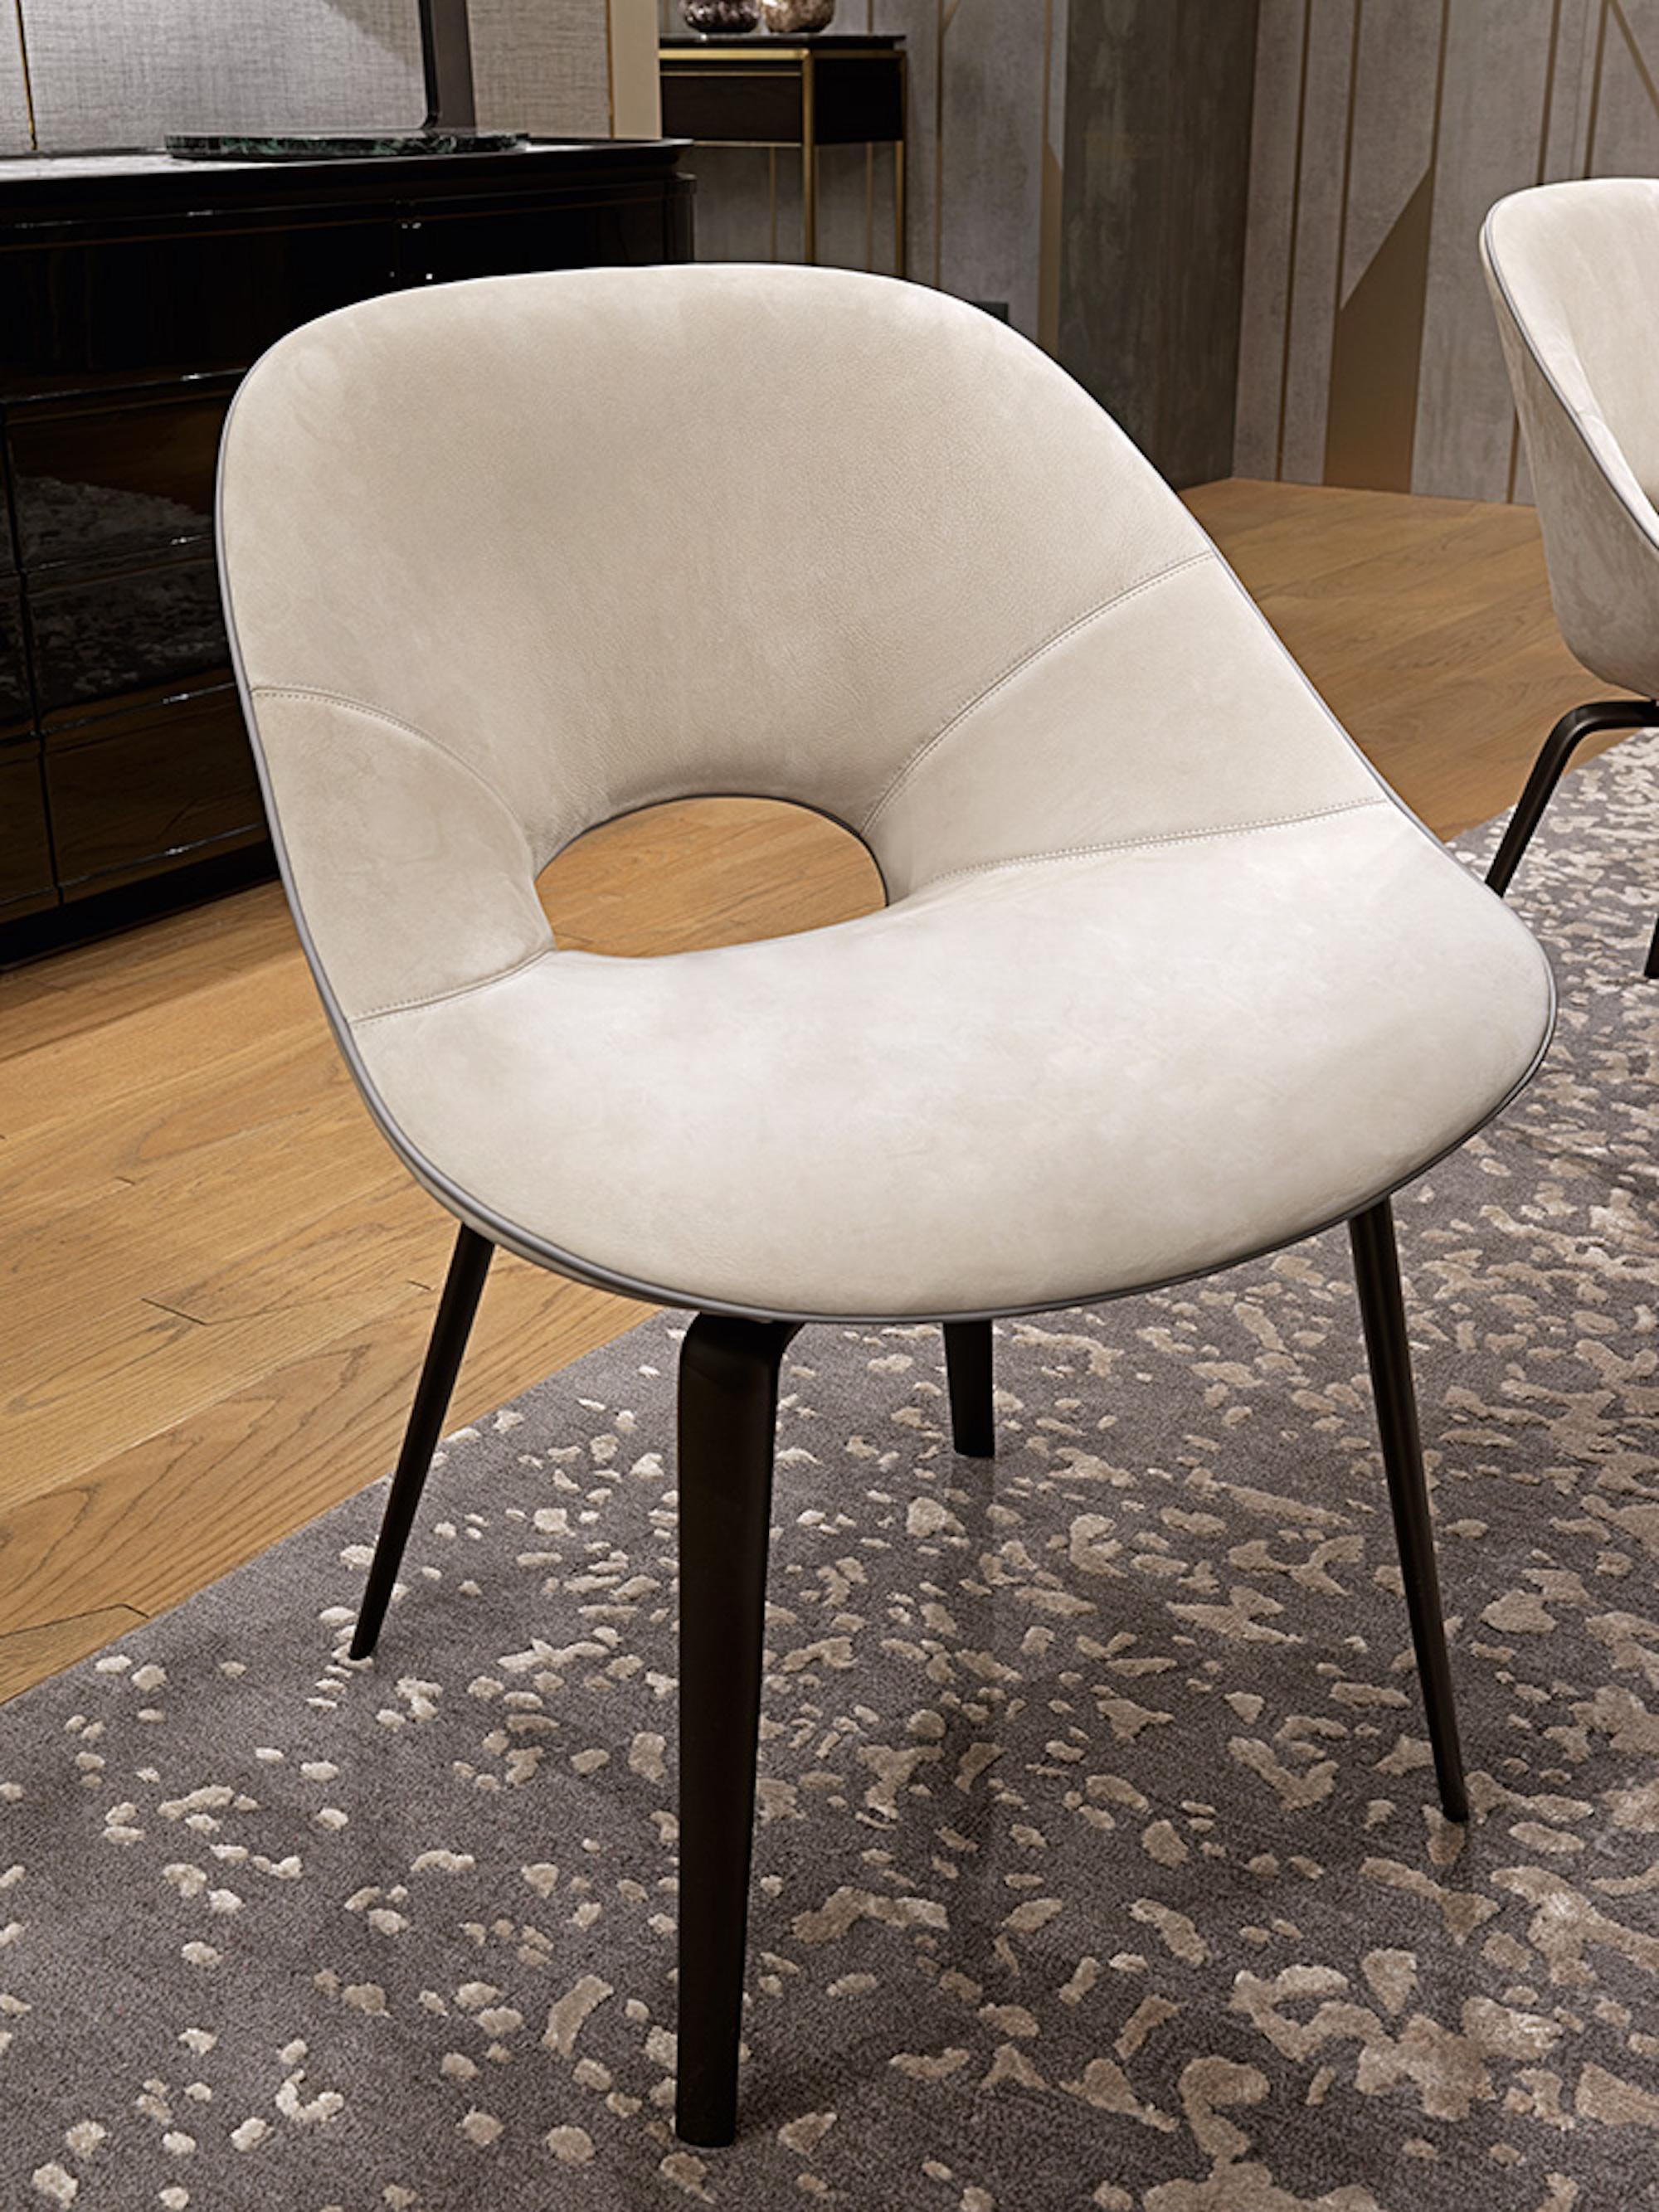 Modern Visionnaire Tanya Armchair with Aluminum Legs and Foam Seat by Roberto Lazzeroni